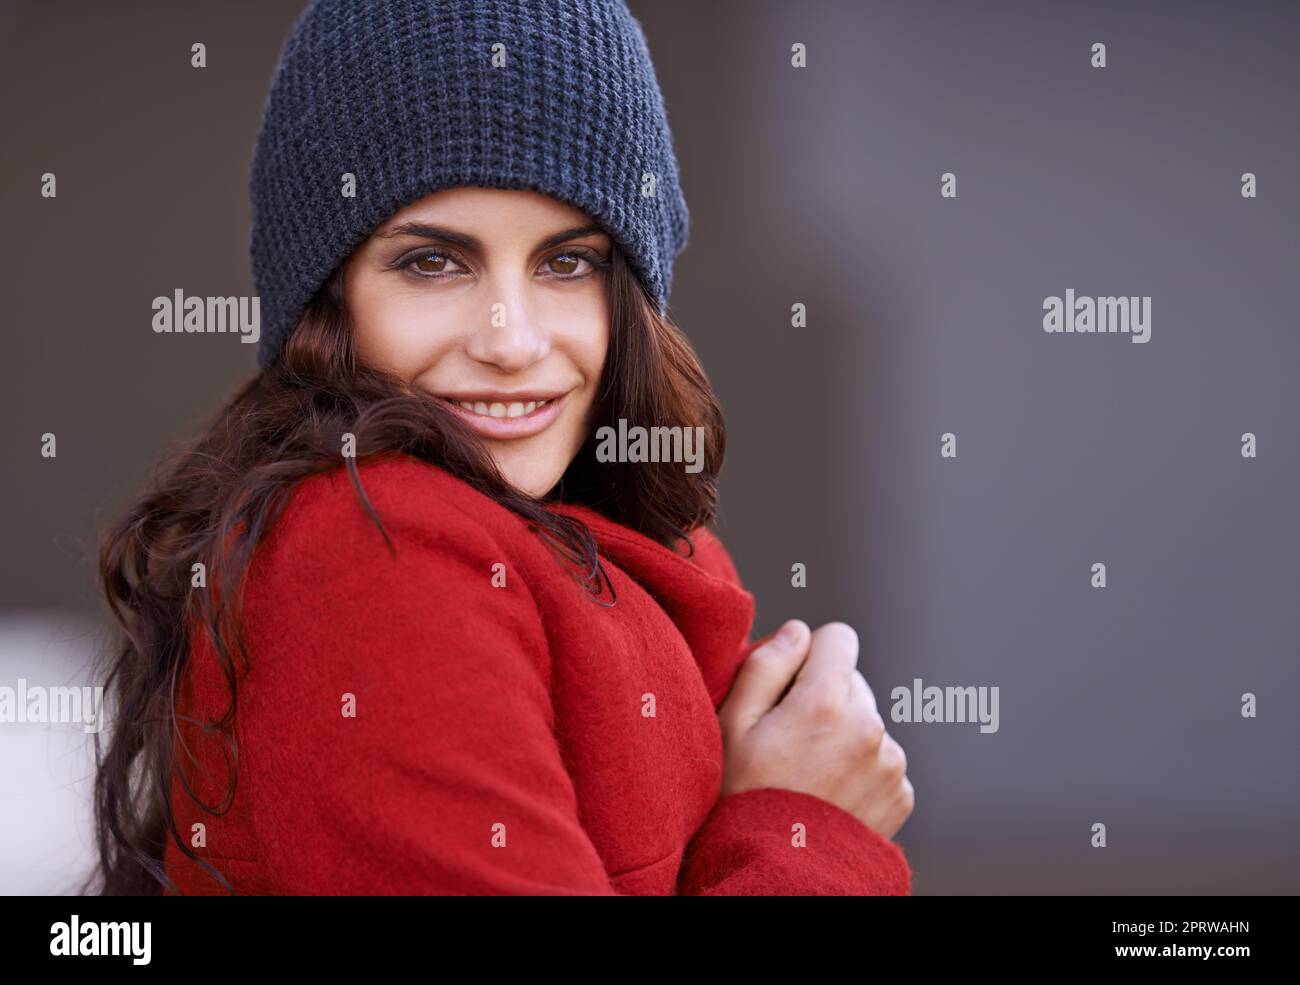 She brightens up the city streets. Portrait of a beautiful young woman standing outside in a red winter coat. Stock Photo